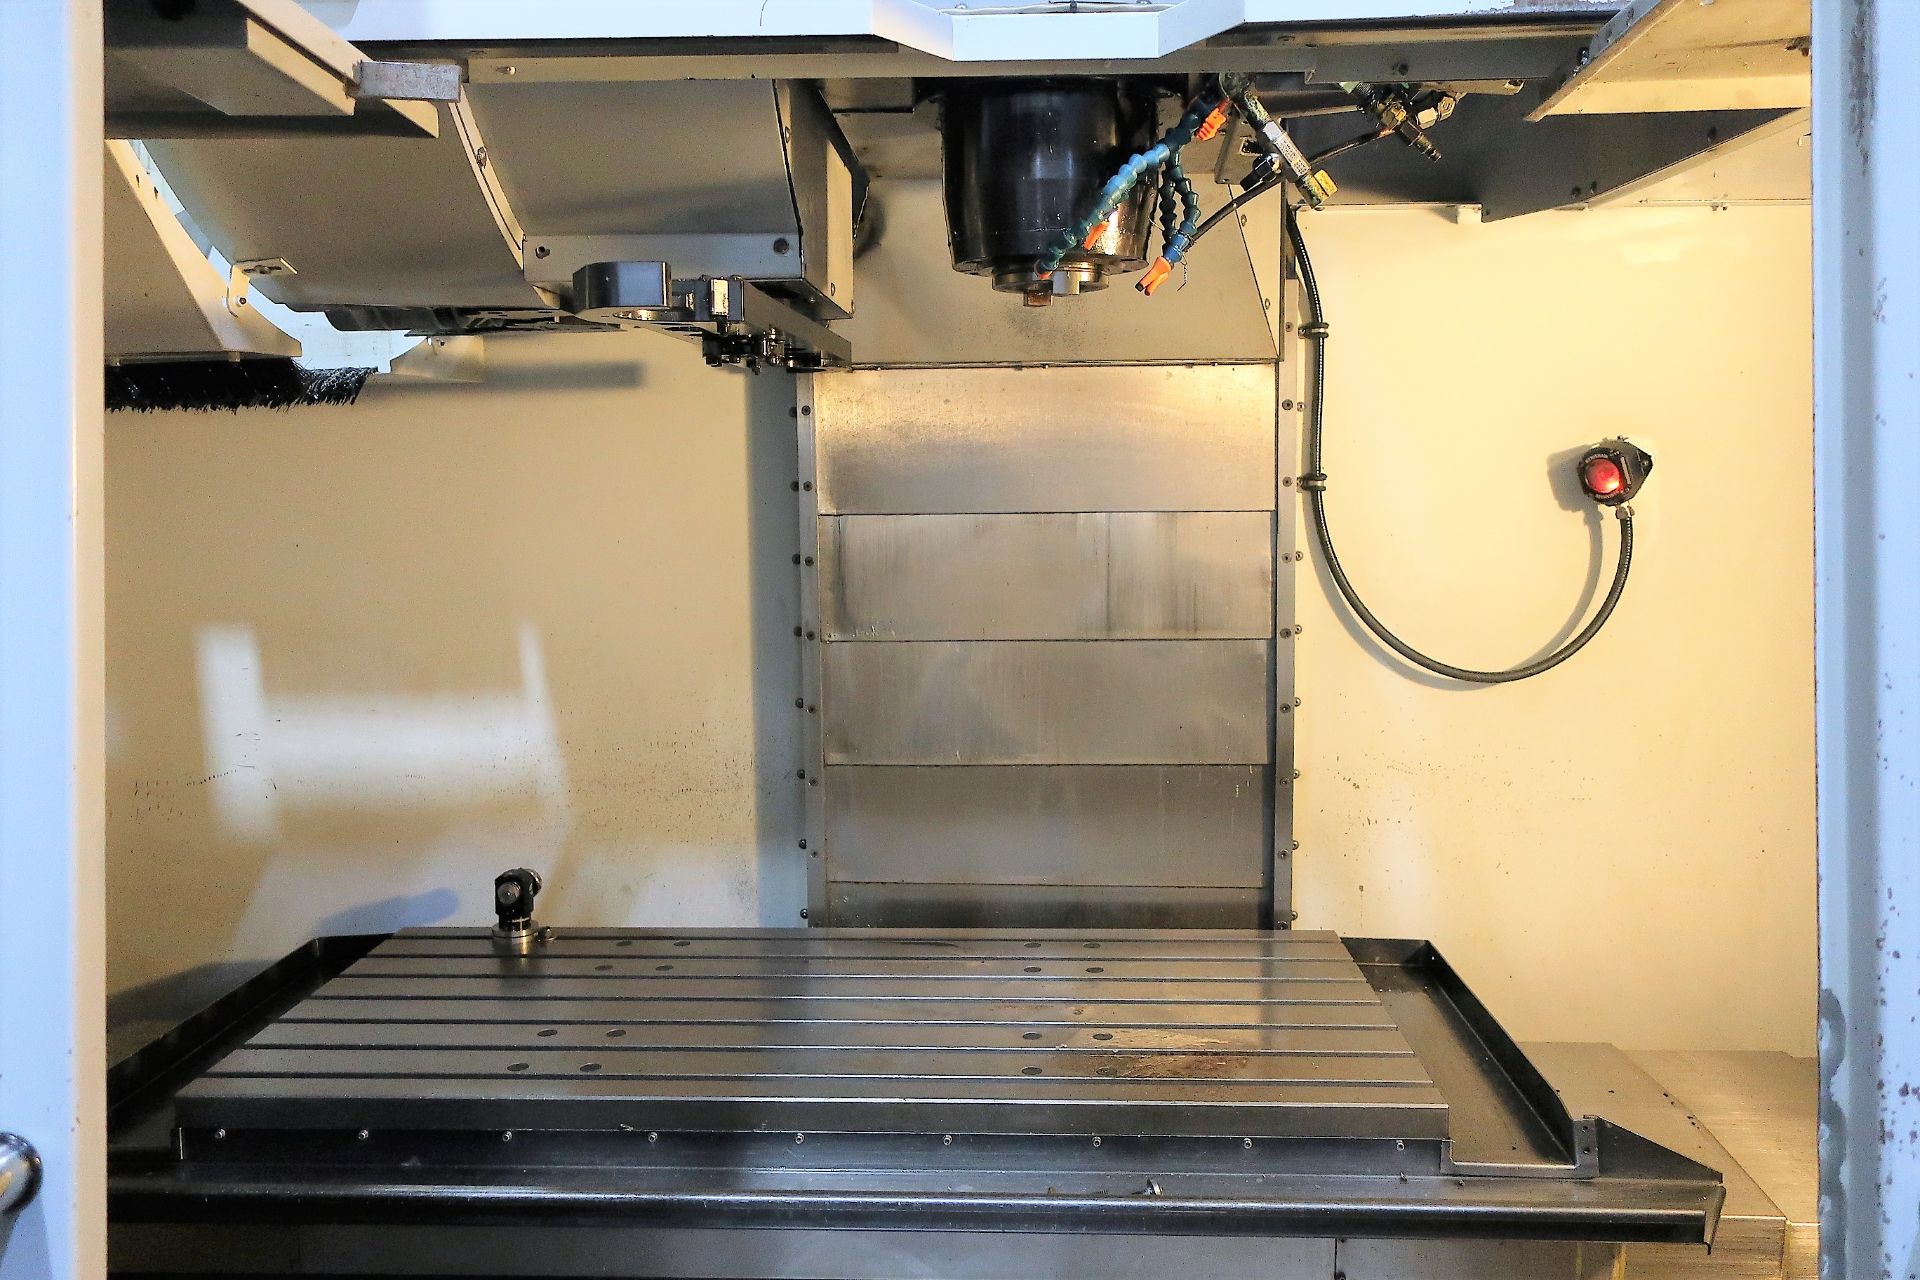 2008 HAAS MODEL VF-3YT/50 CNC VERTICAL MACHINING CENTER, SN 1065663 - Image 3 of 11